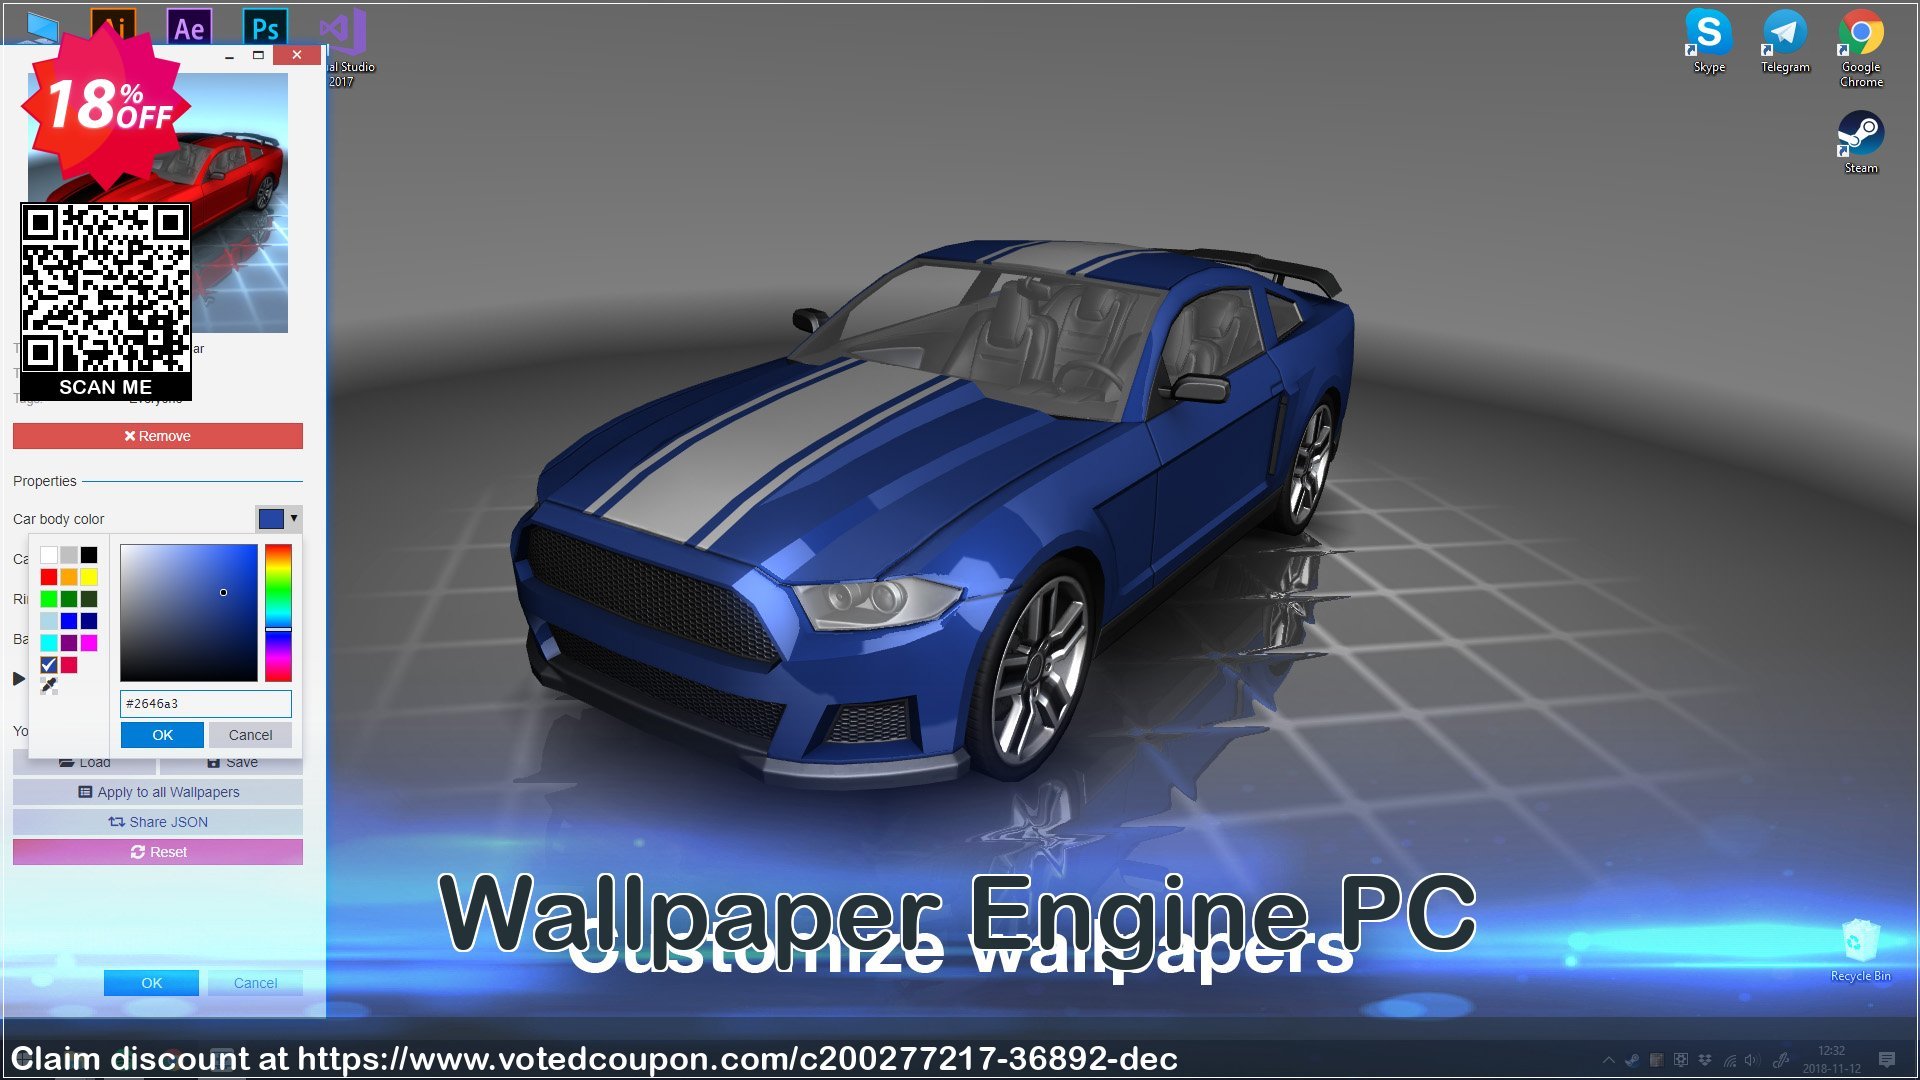 Wallpaper Engine PC Coupon Code Apr 2024, 18% OFF - VotedCoupon